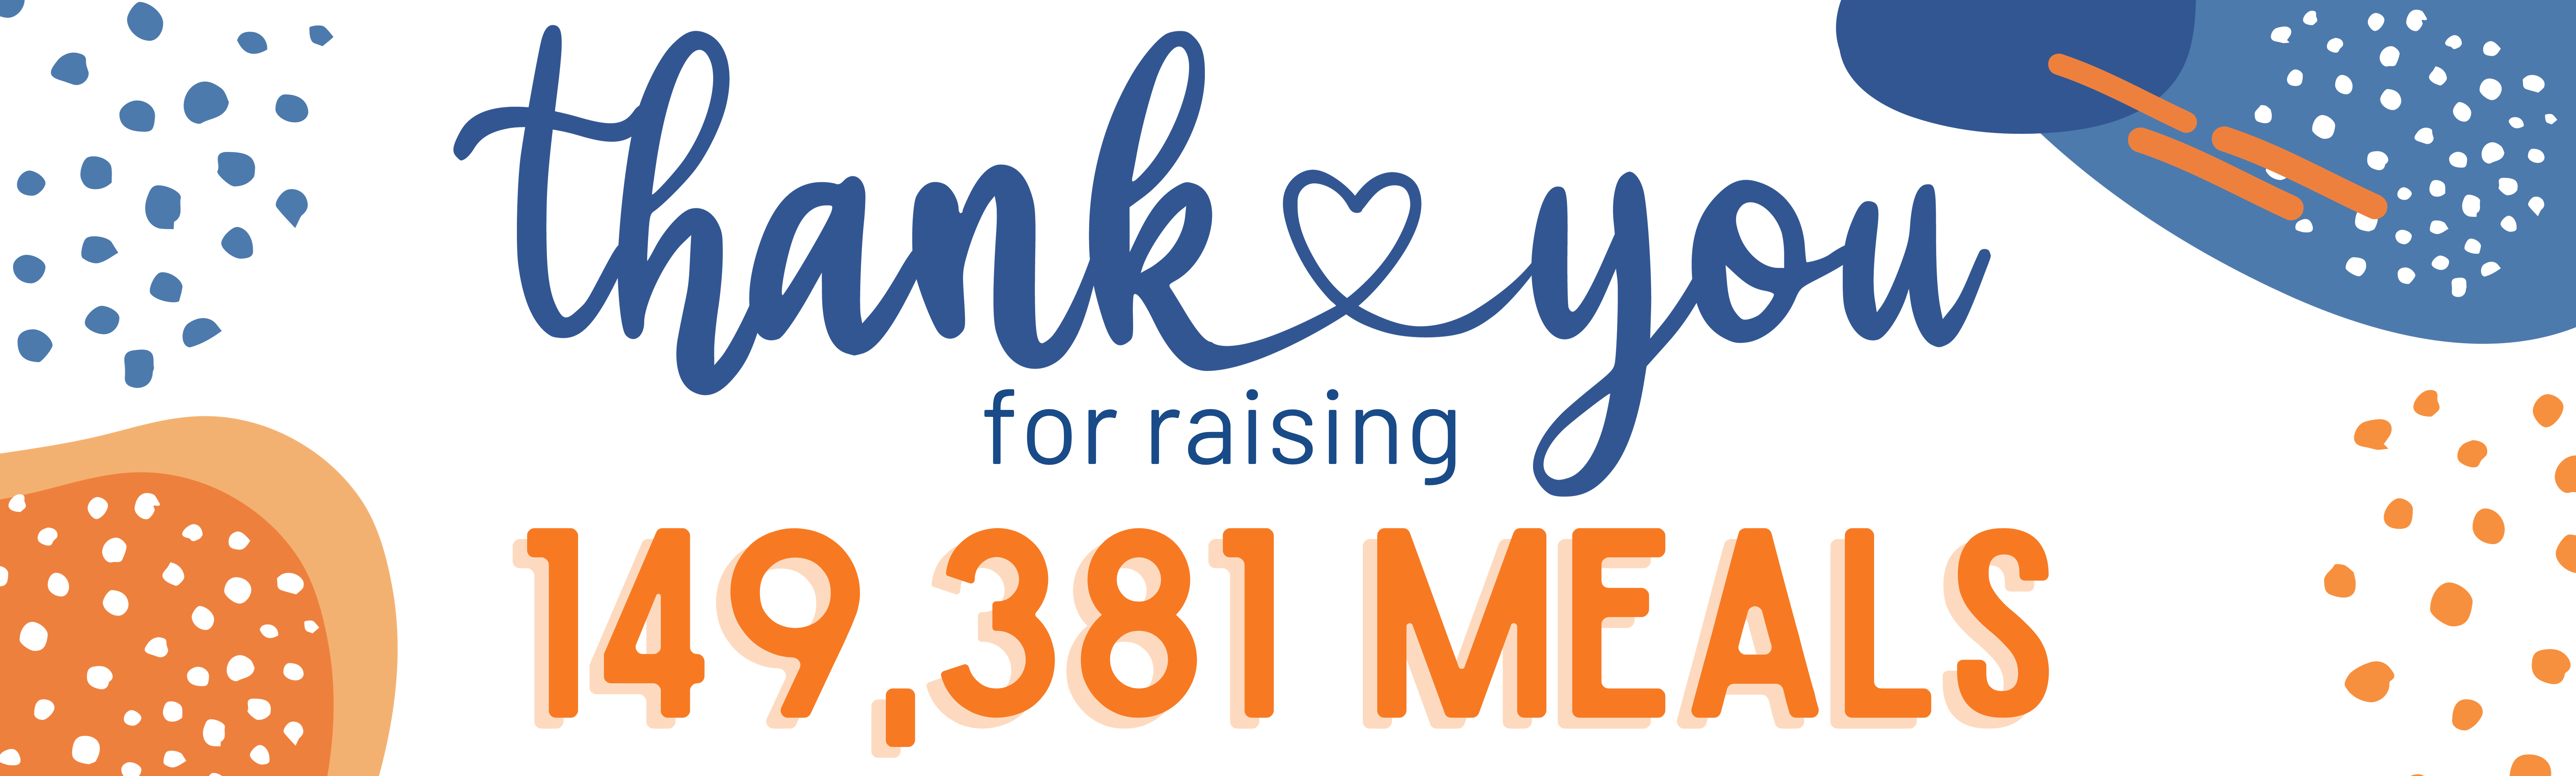 Thank you for raising 149,381 meals